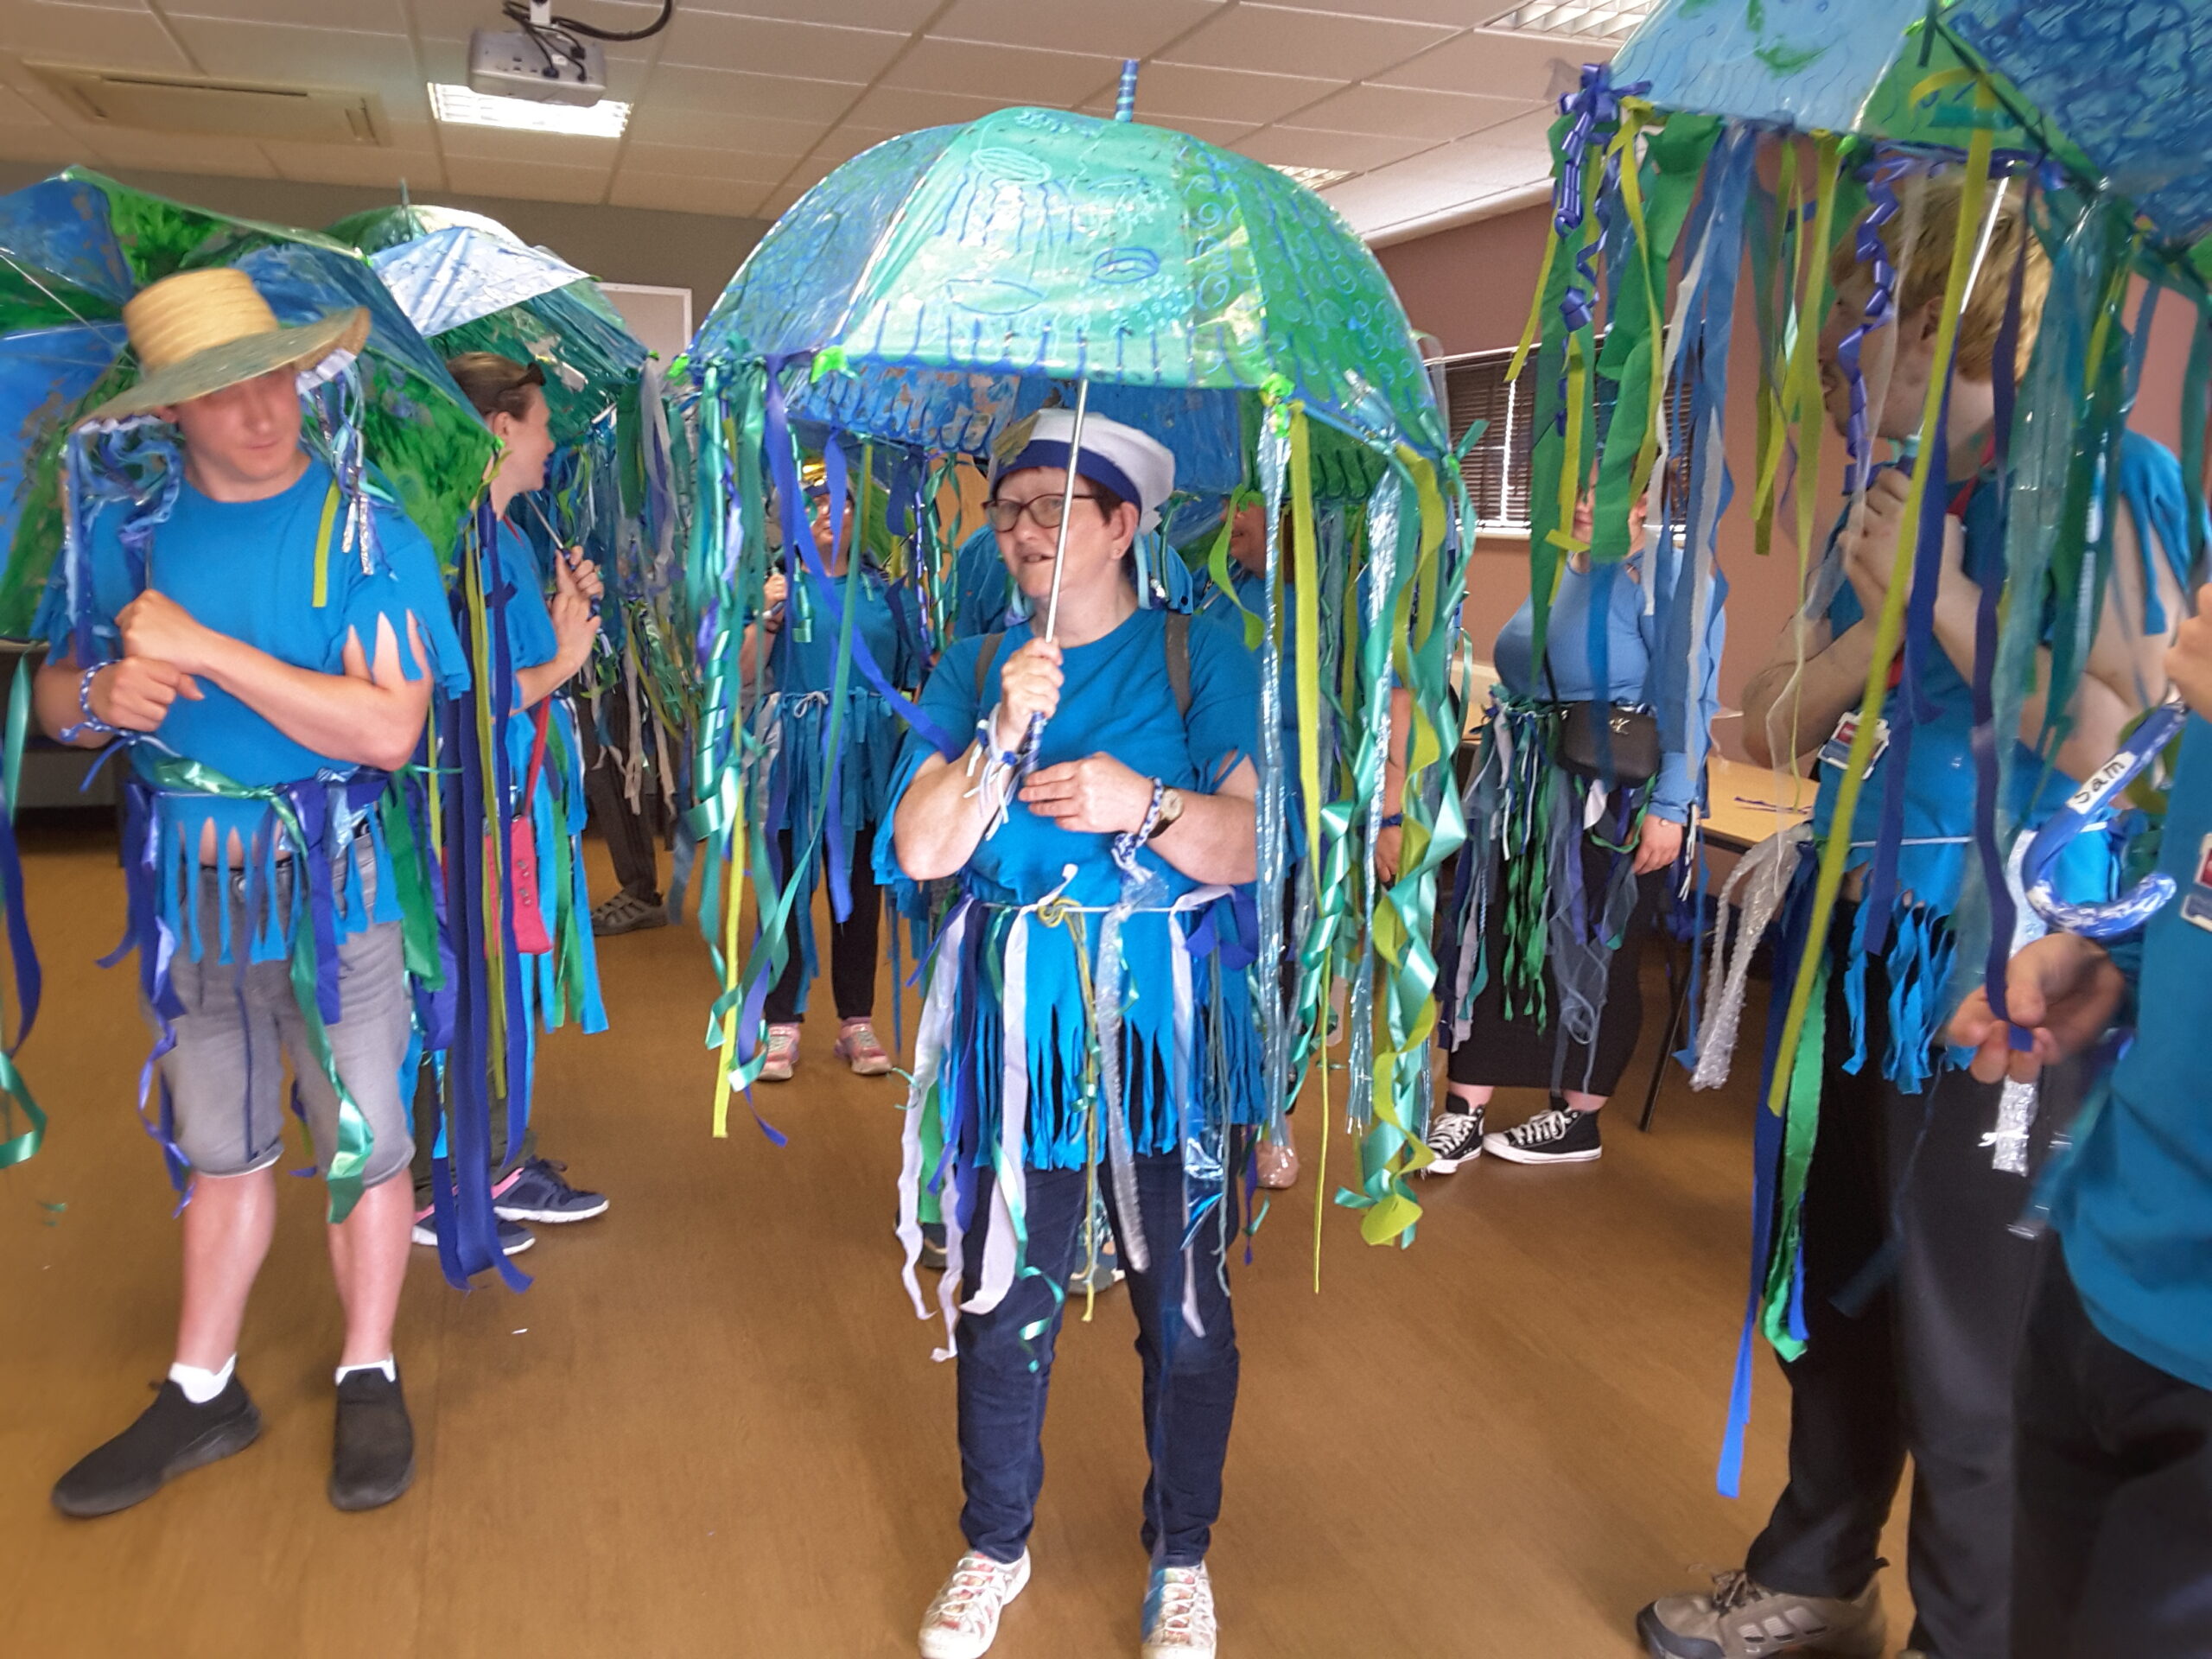 Interior shot of Brave Art participants in fancy dress resembling sea creatures and carrying decorated umbrellas, as they prepare for the big parade